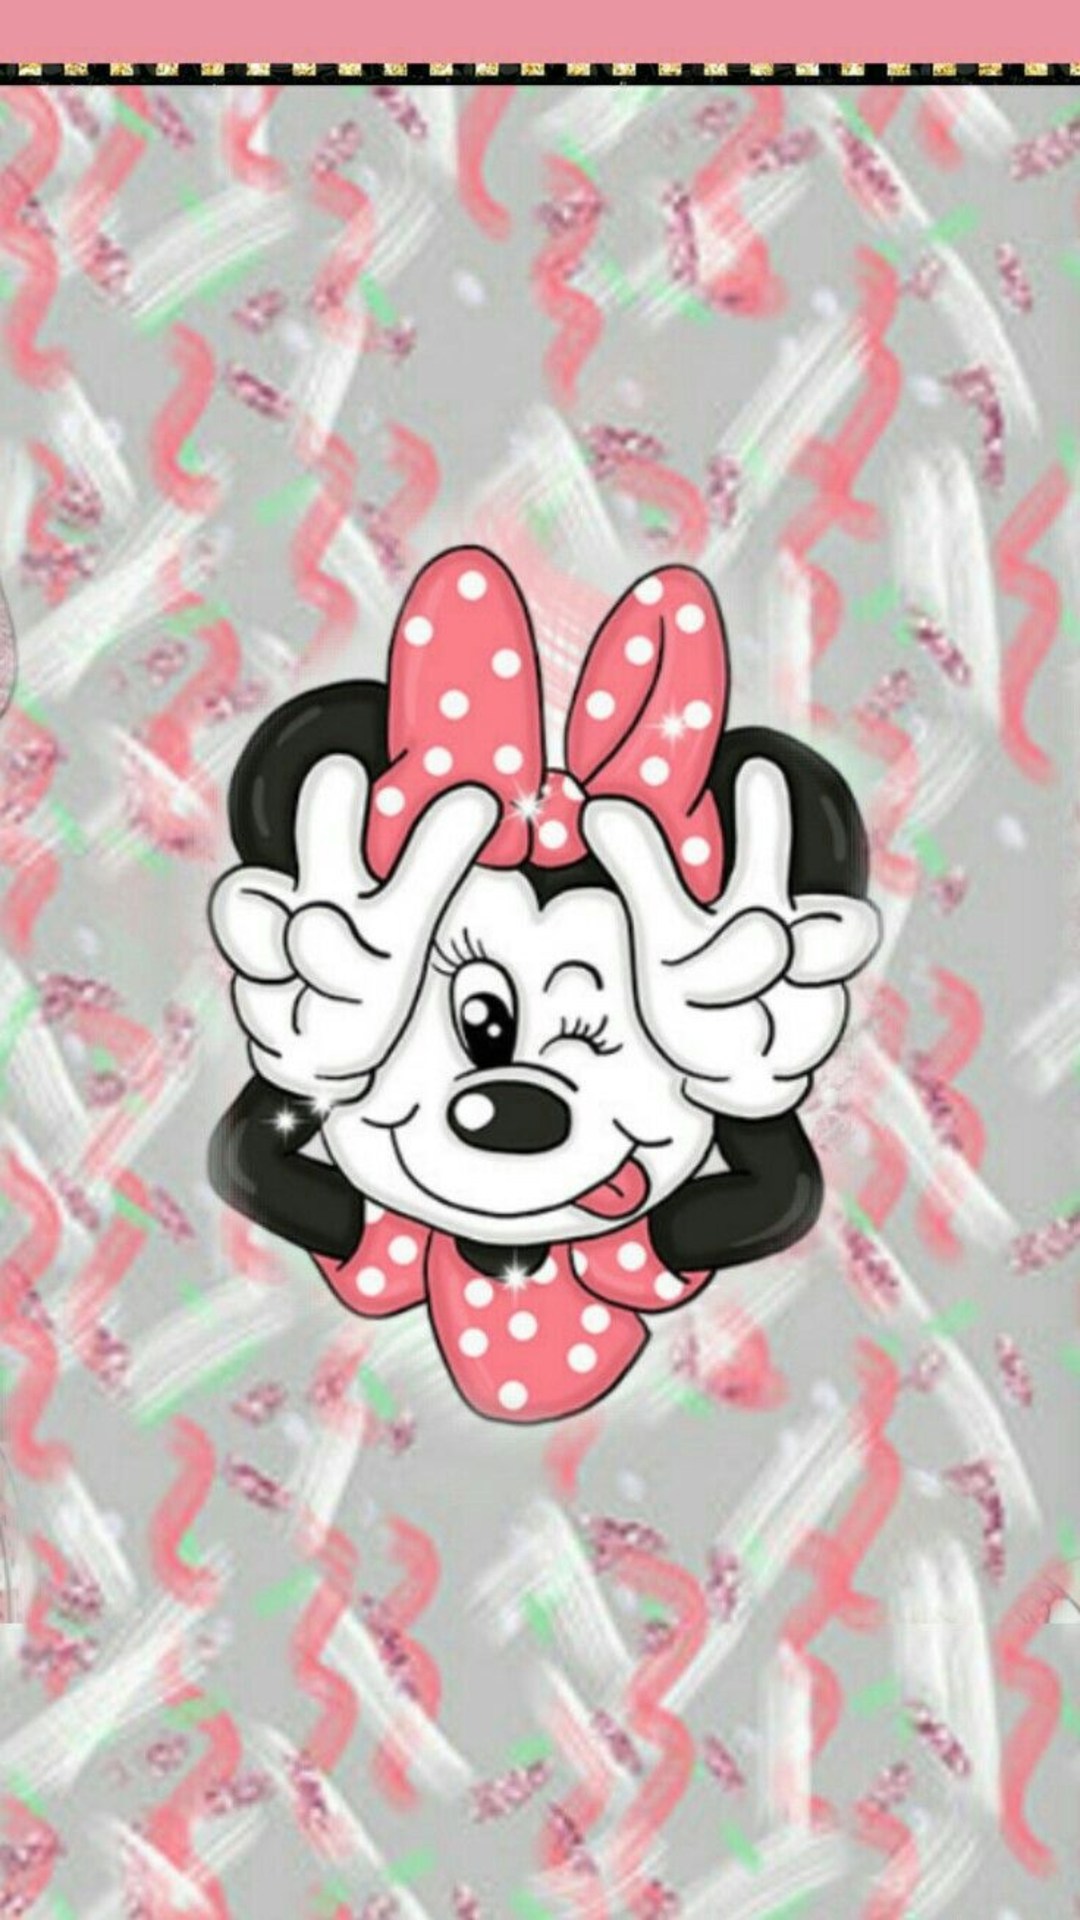 Cute Minnie Mouse Wallpaper - Iphone Iphone Wallpapers Mickey And Minnie  Mouse - 1080x1920 Wallpaper 